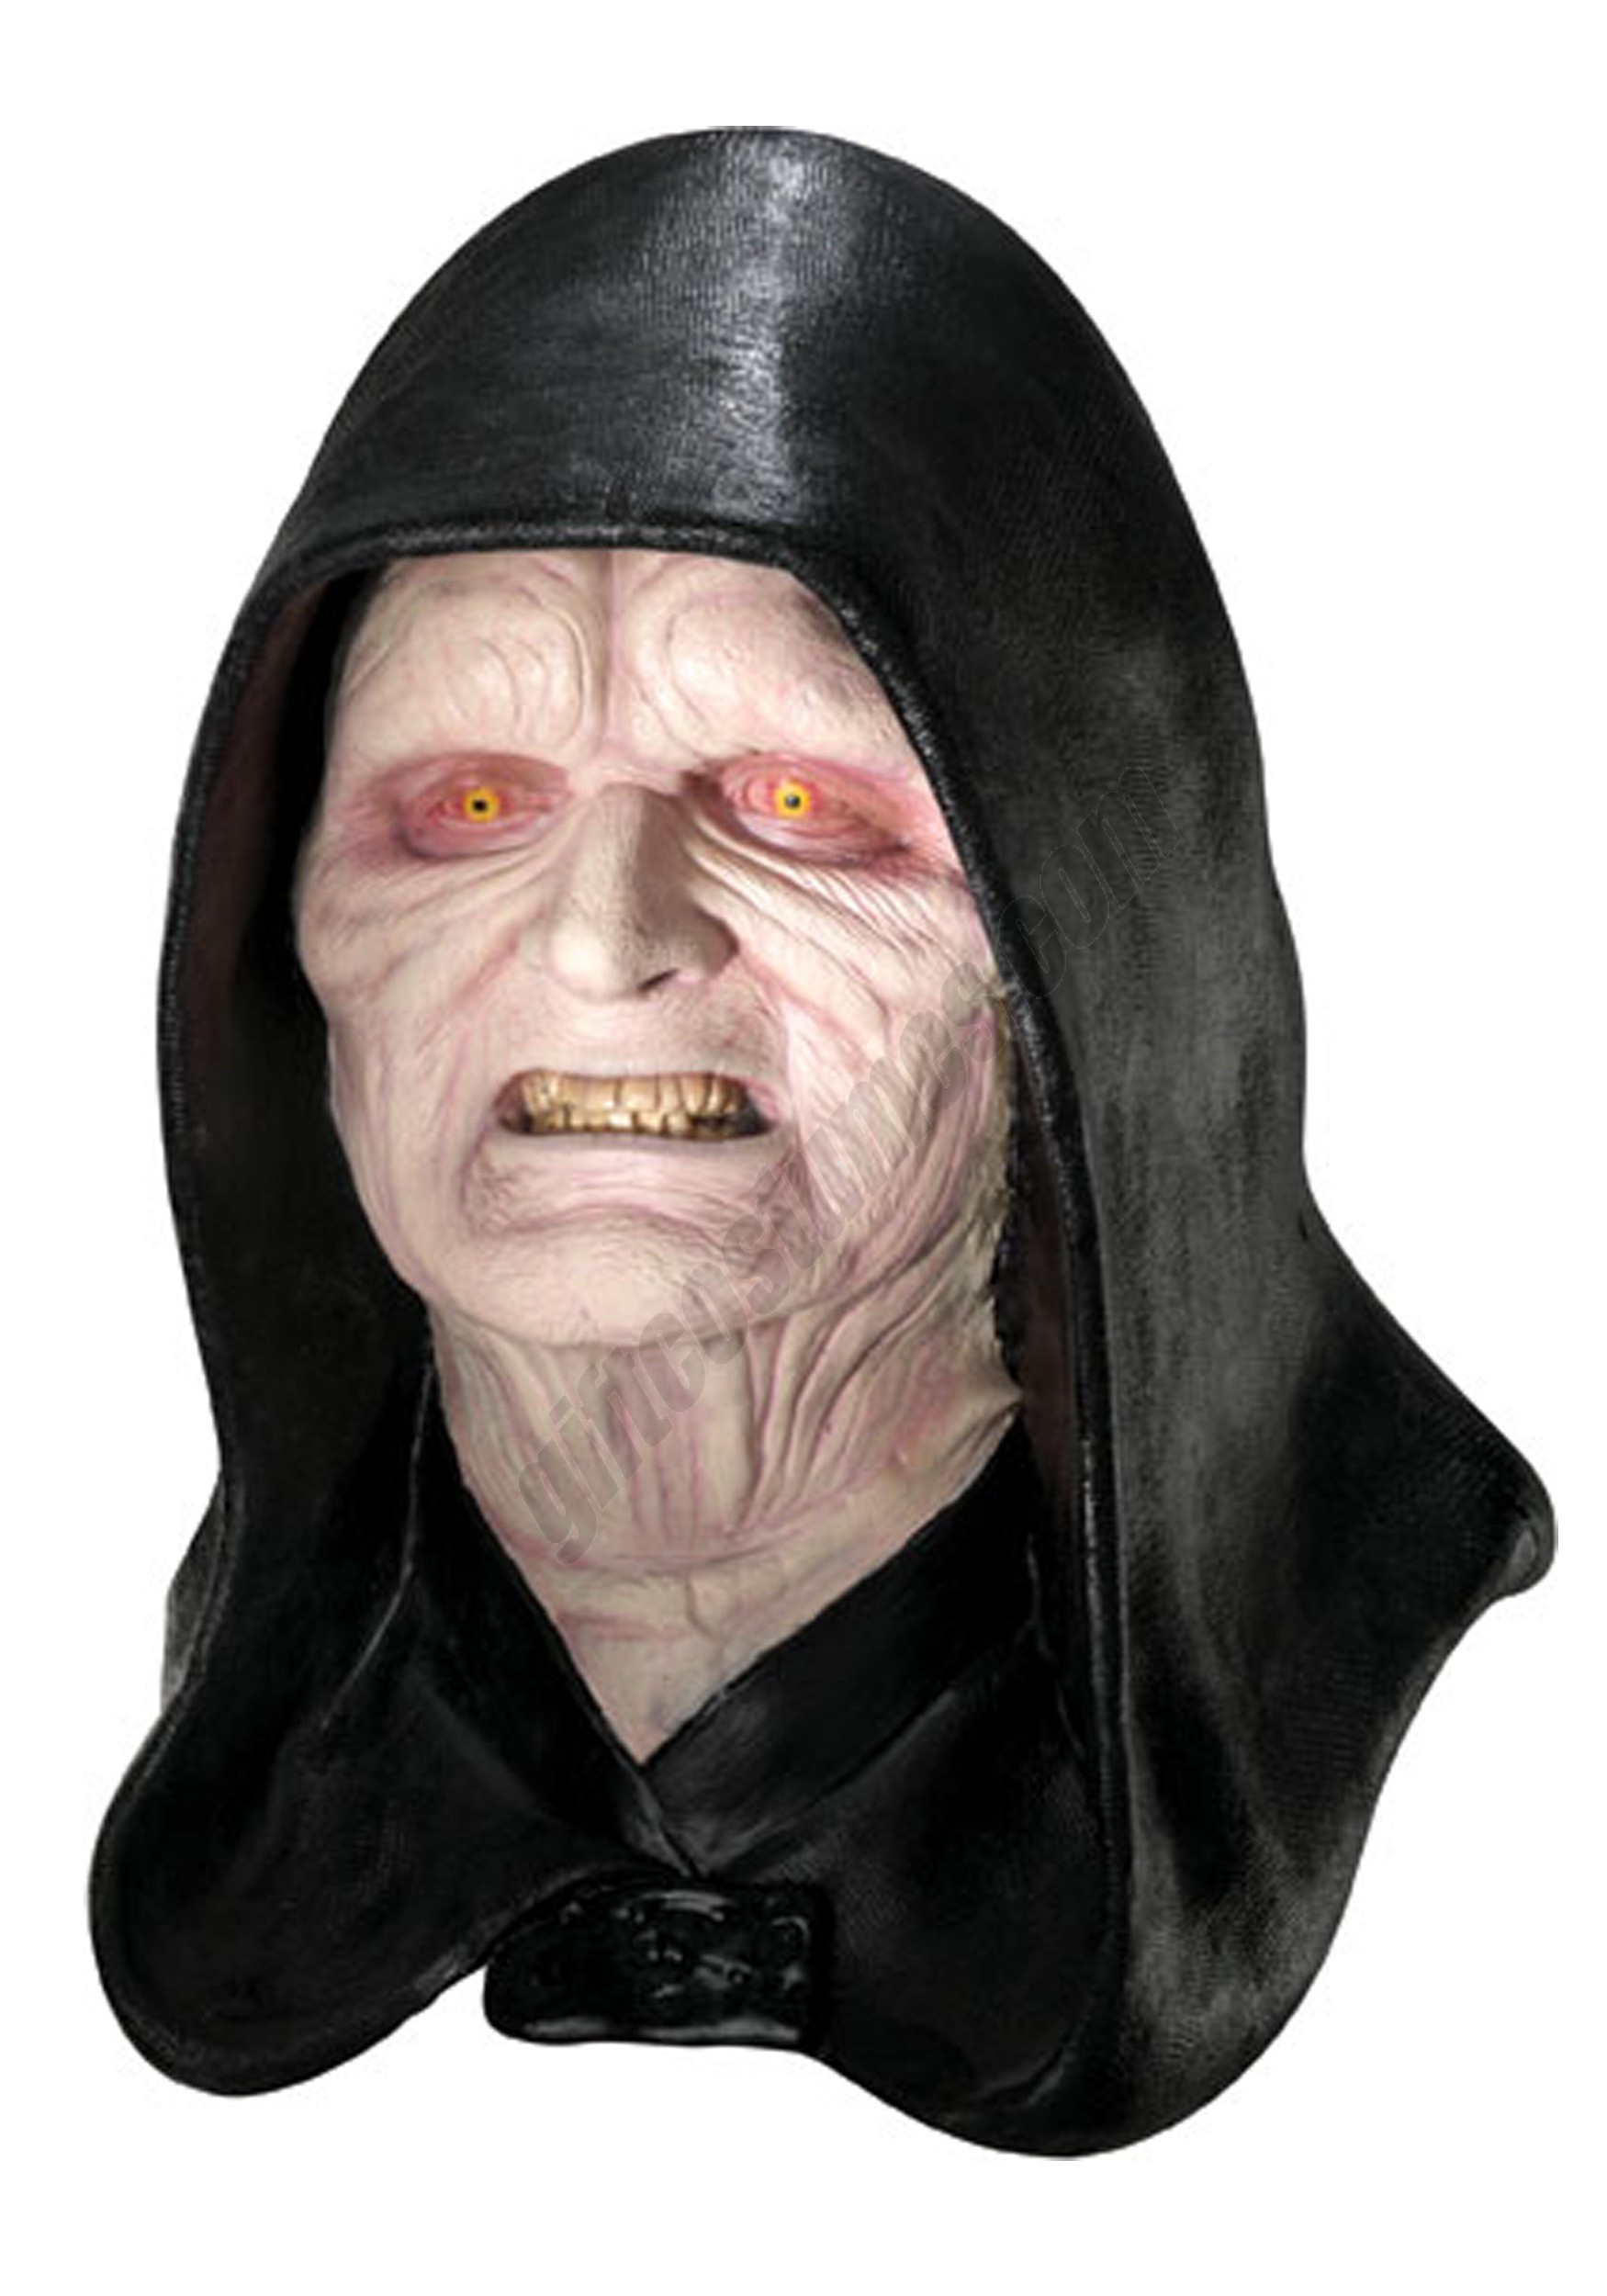 Deluxe Emperor Palpatine Mask Promotions - Deluxe Emperor Palpatine Mask Promotions